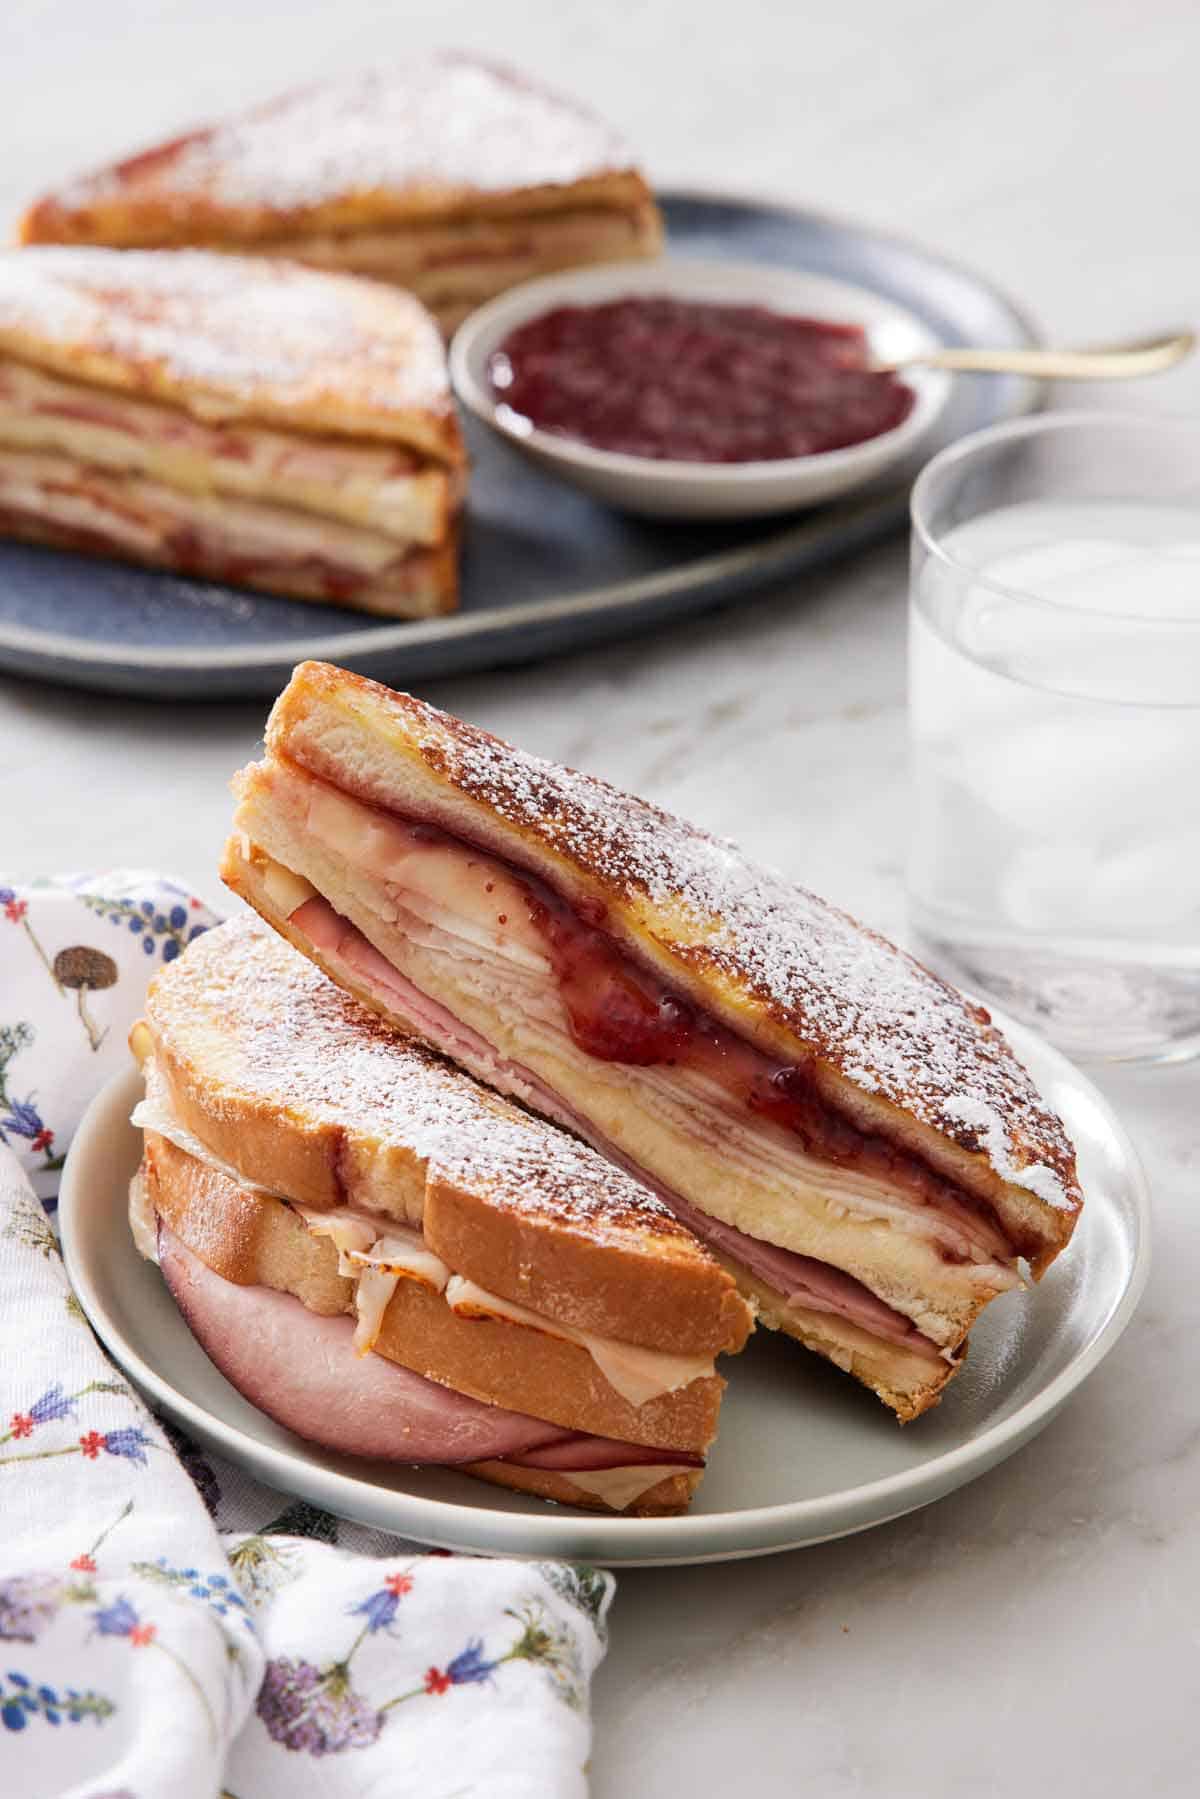 A plate with a Monte Cristo sandwich cut in half with another one in the background along with a glass of water.